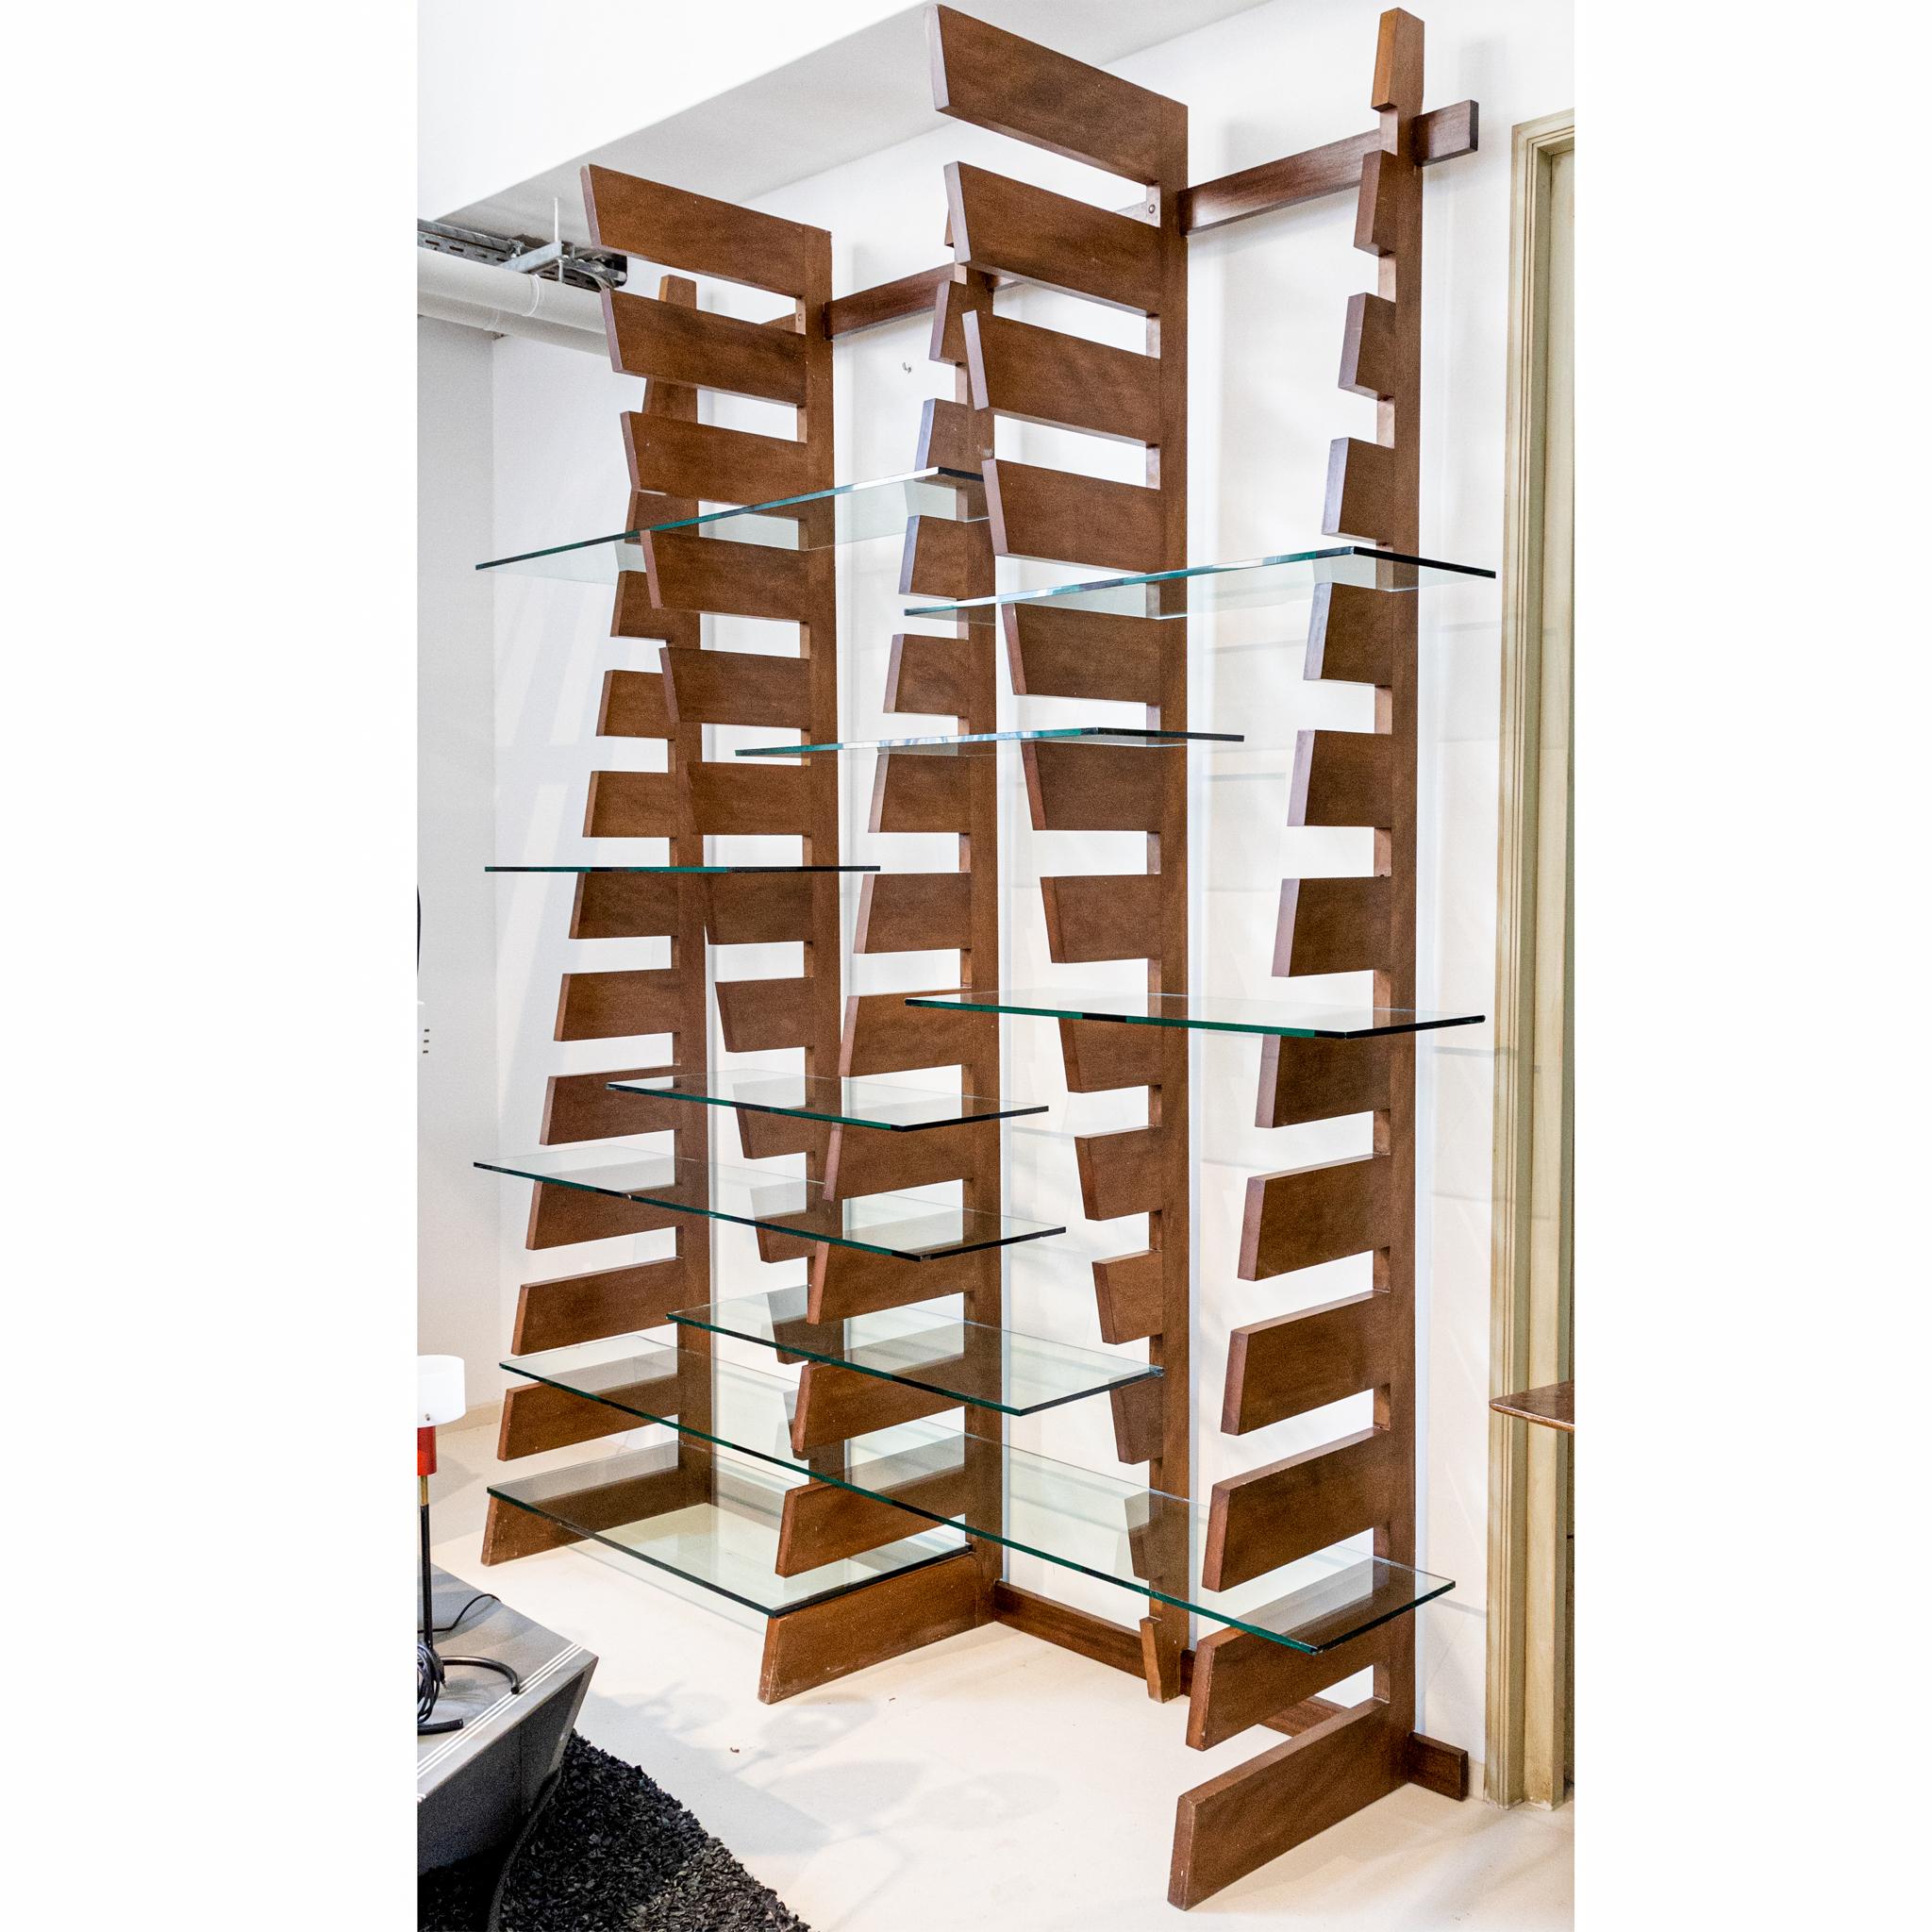 Large shelf made of wedge-shaped partitions with individually placeable glass shelves.